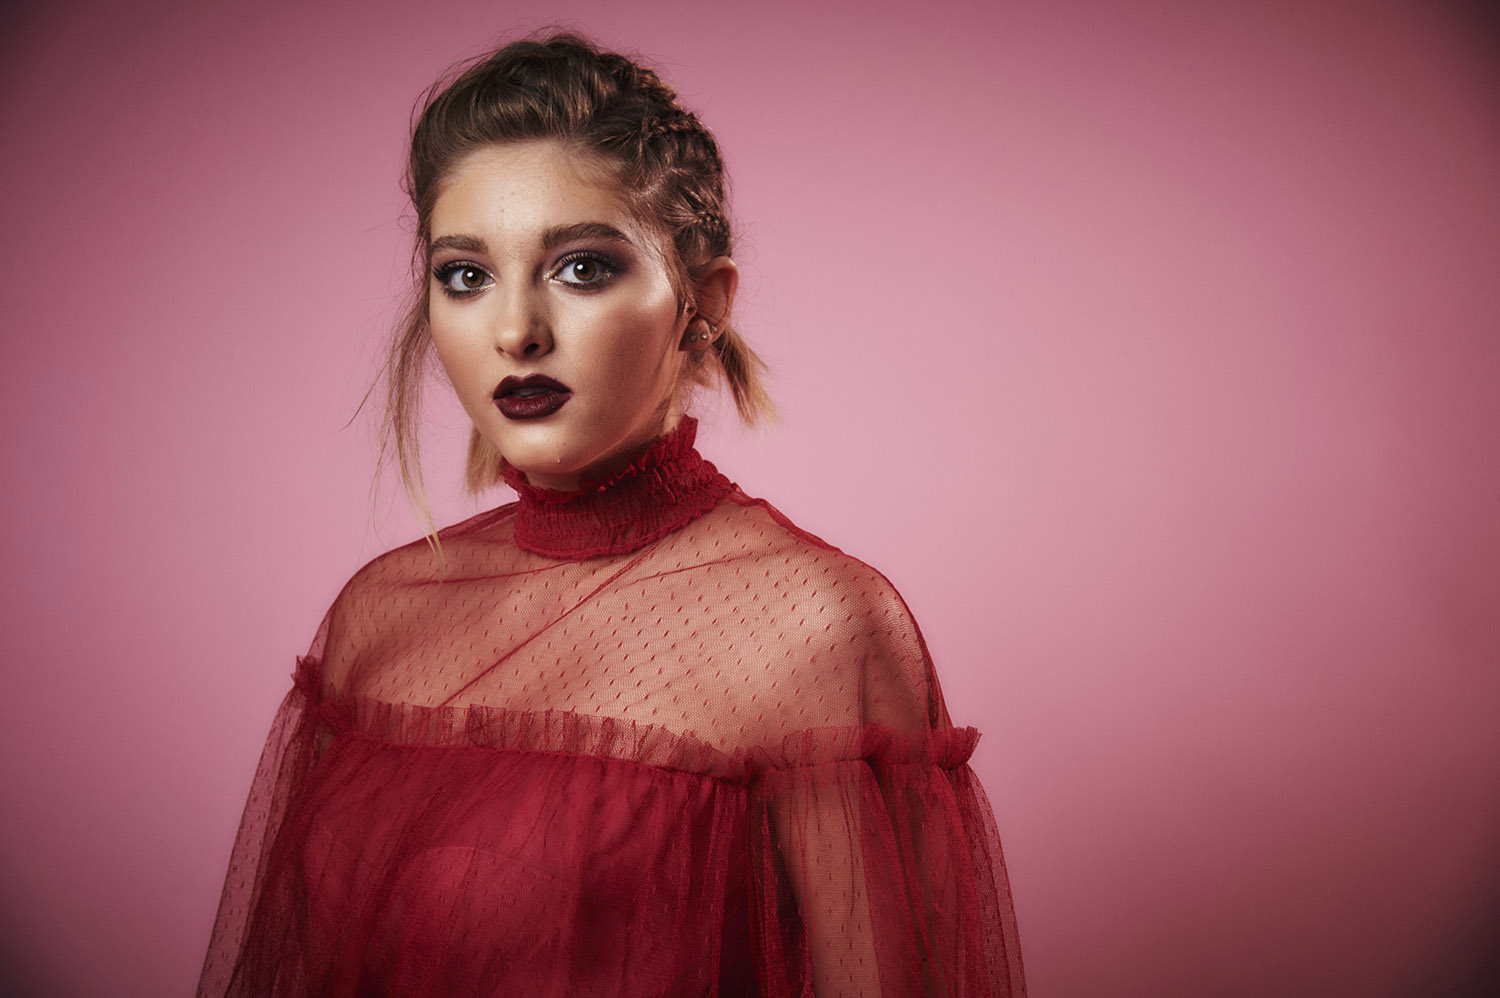 15 Extraordinary Facts About Willow Shields - Facts.net